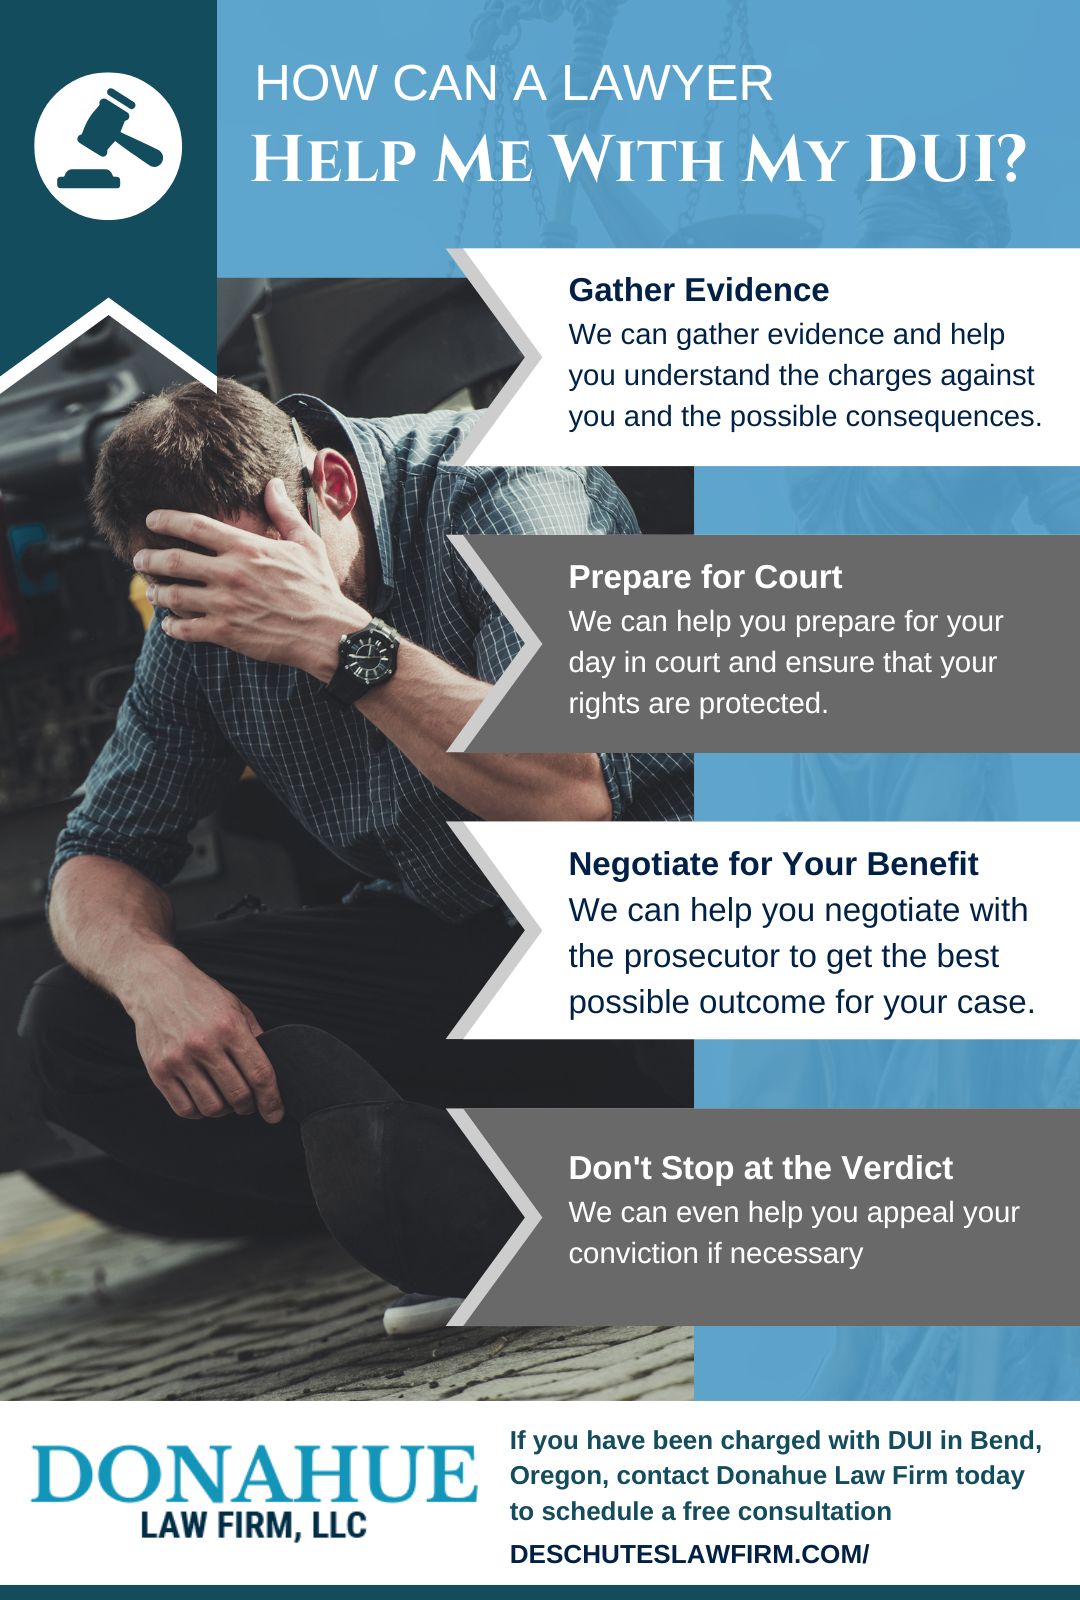 If you've been charged with DUI, you may be feeling overwhelmed and uncertain about what to do next. Donahue Law Firm can help. Our Bend DUI attorney has extensive experience handling these types of cases, and will work diligently to get the best possible outcome for you. Contact us today to schedule a consultation. We'll review your case and let you know what we can do to help.